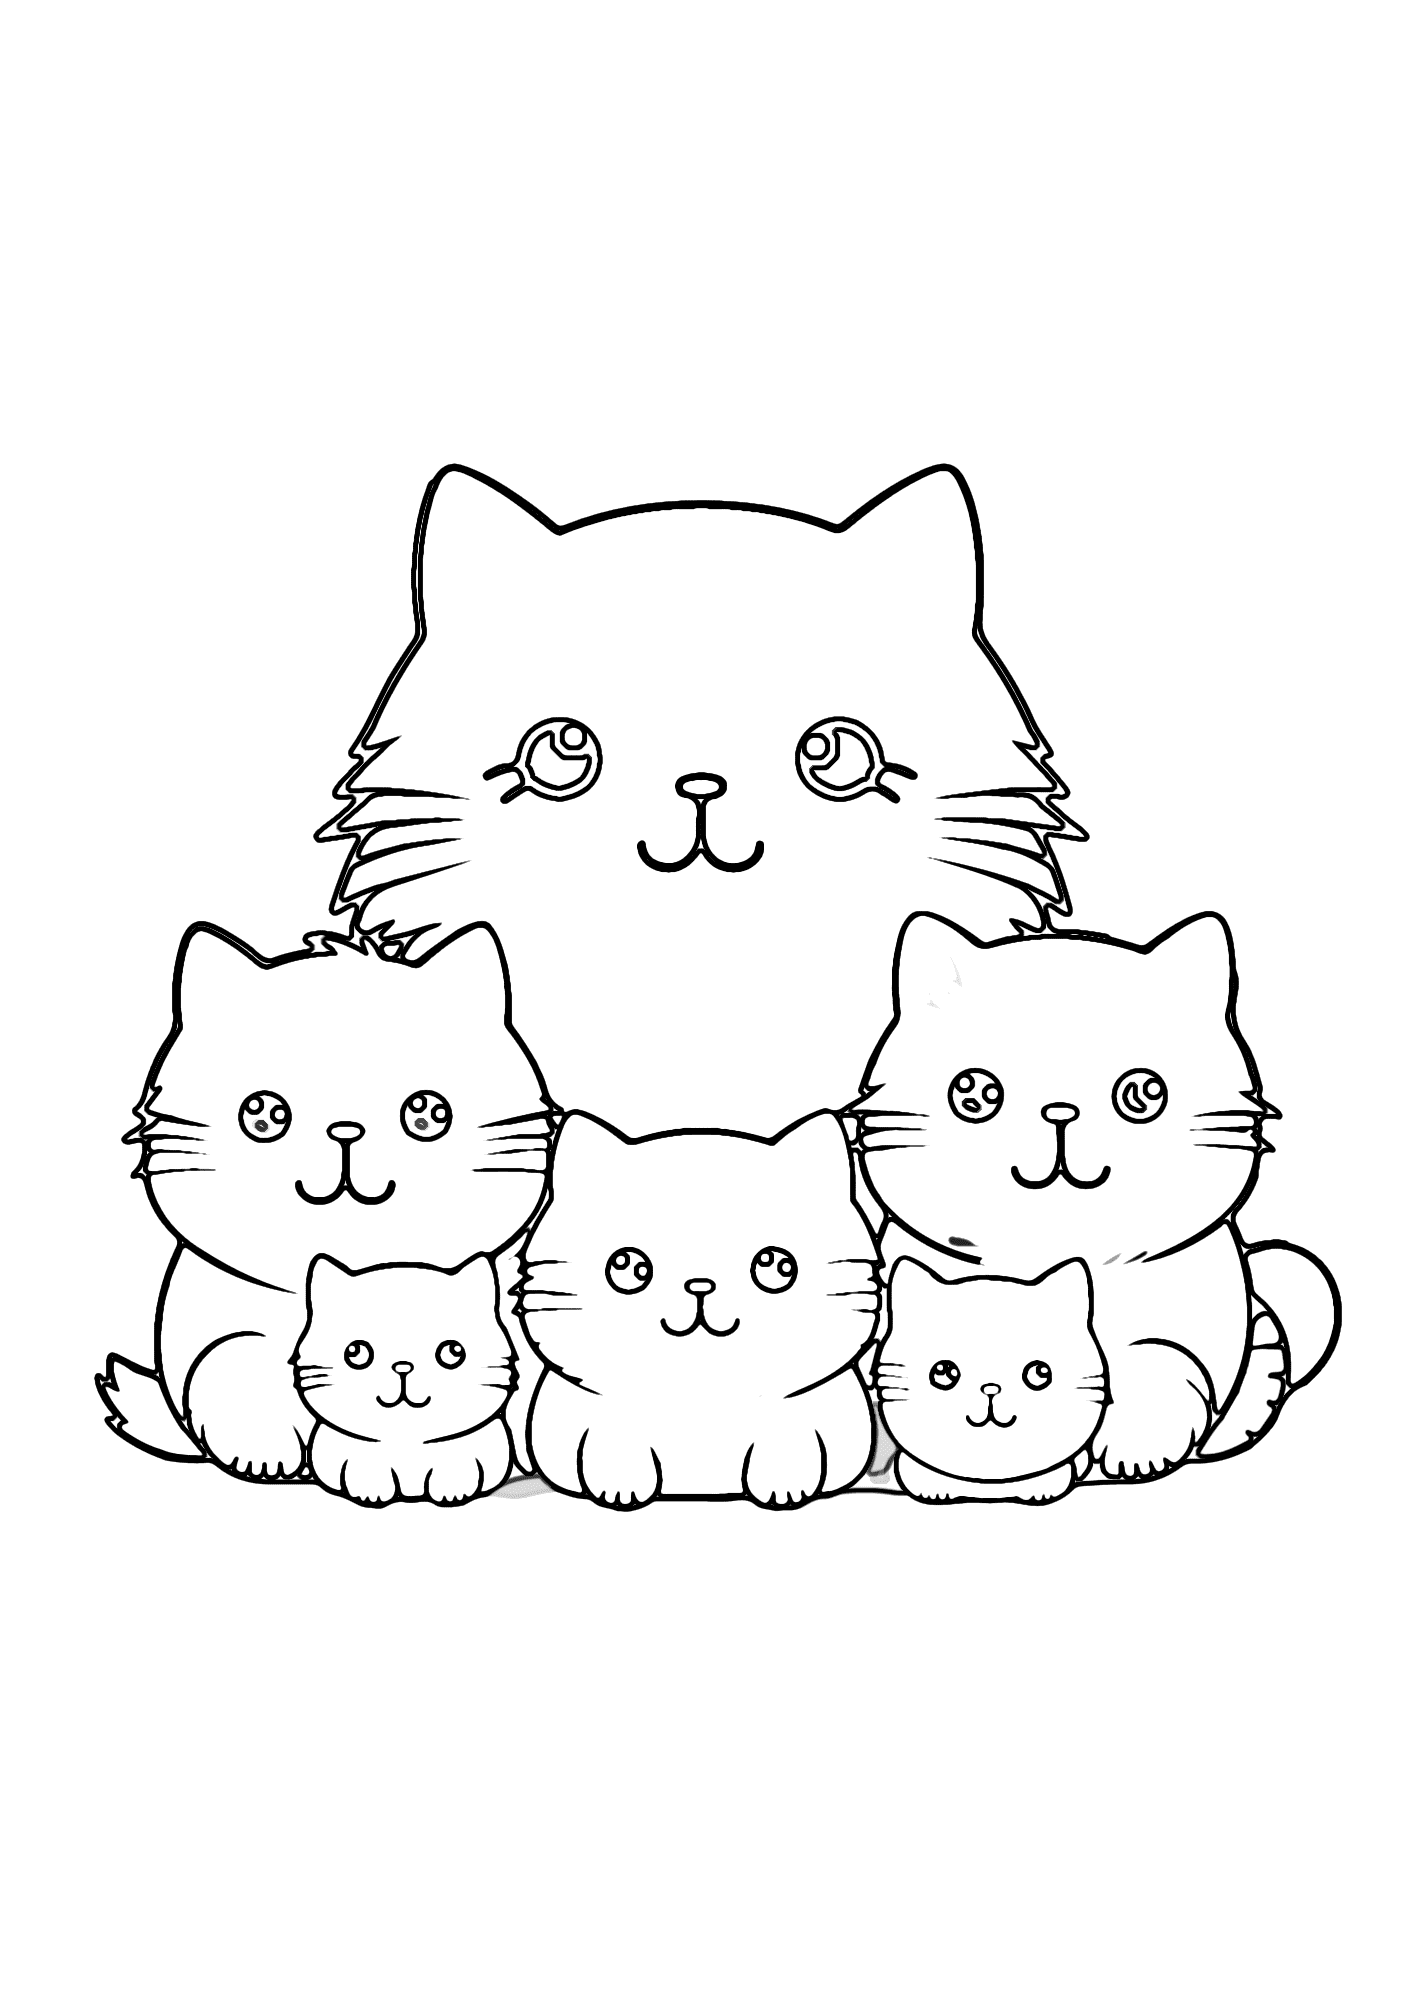 Black Cats Coloring Page